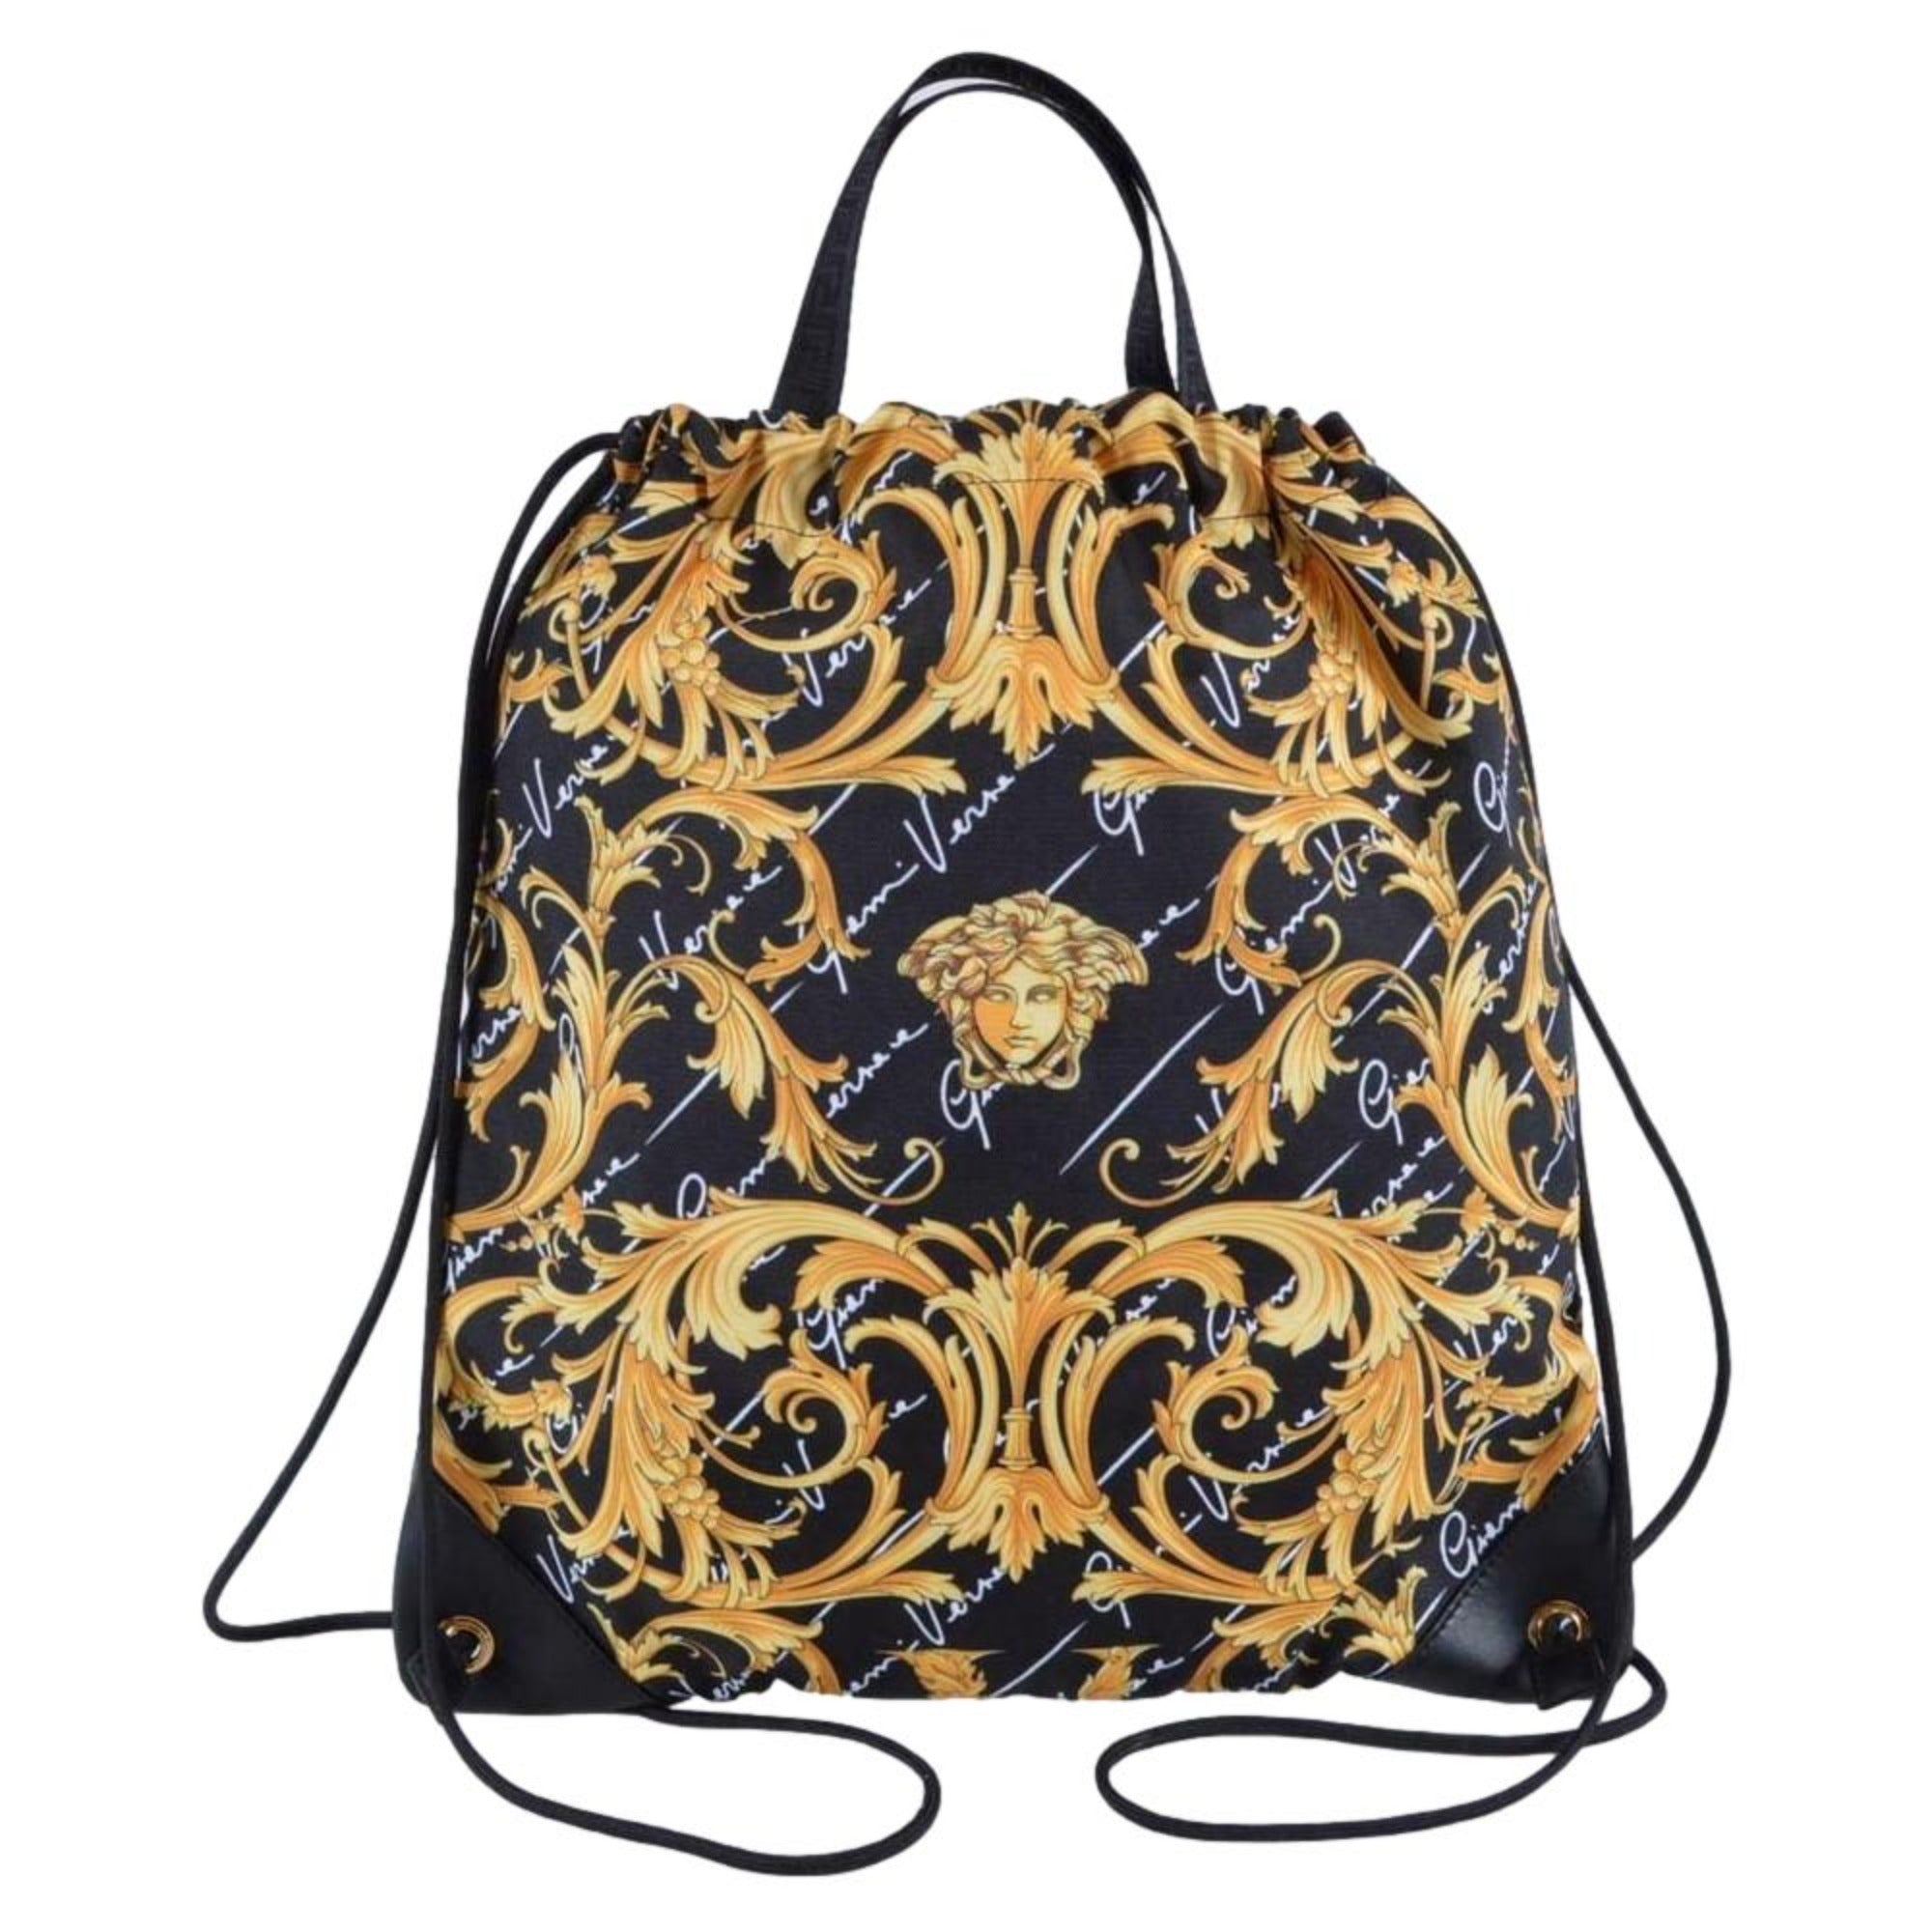 Versace Black Nylon Barocco Signature Print Drawstring Backpack 1002886 at_Queen_Bee_of_Beverly_Hills